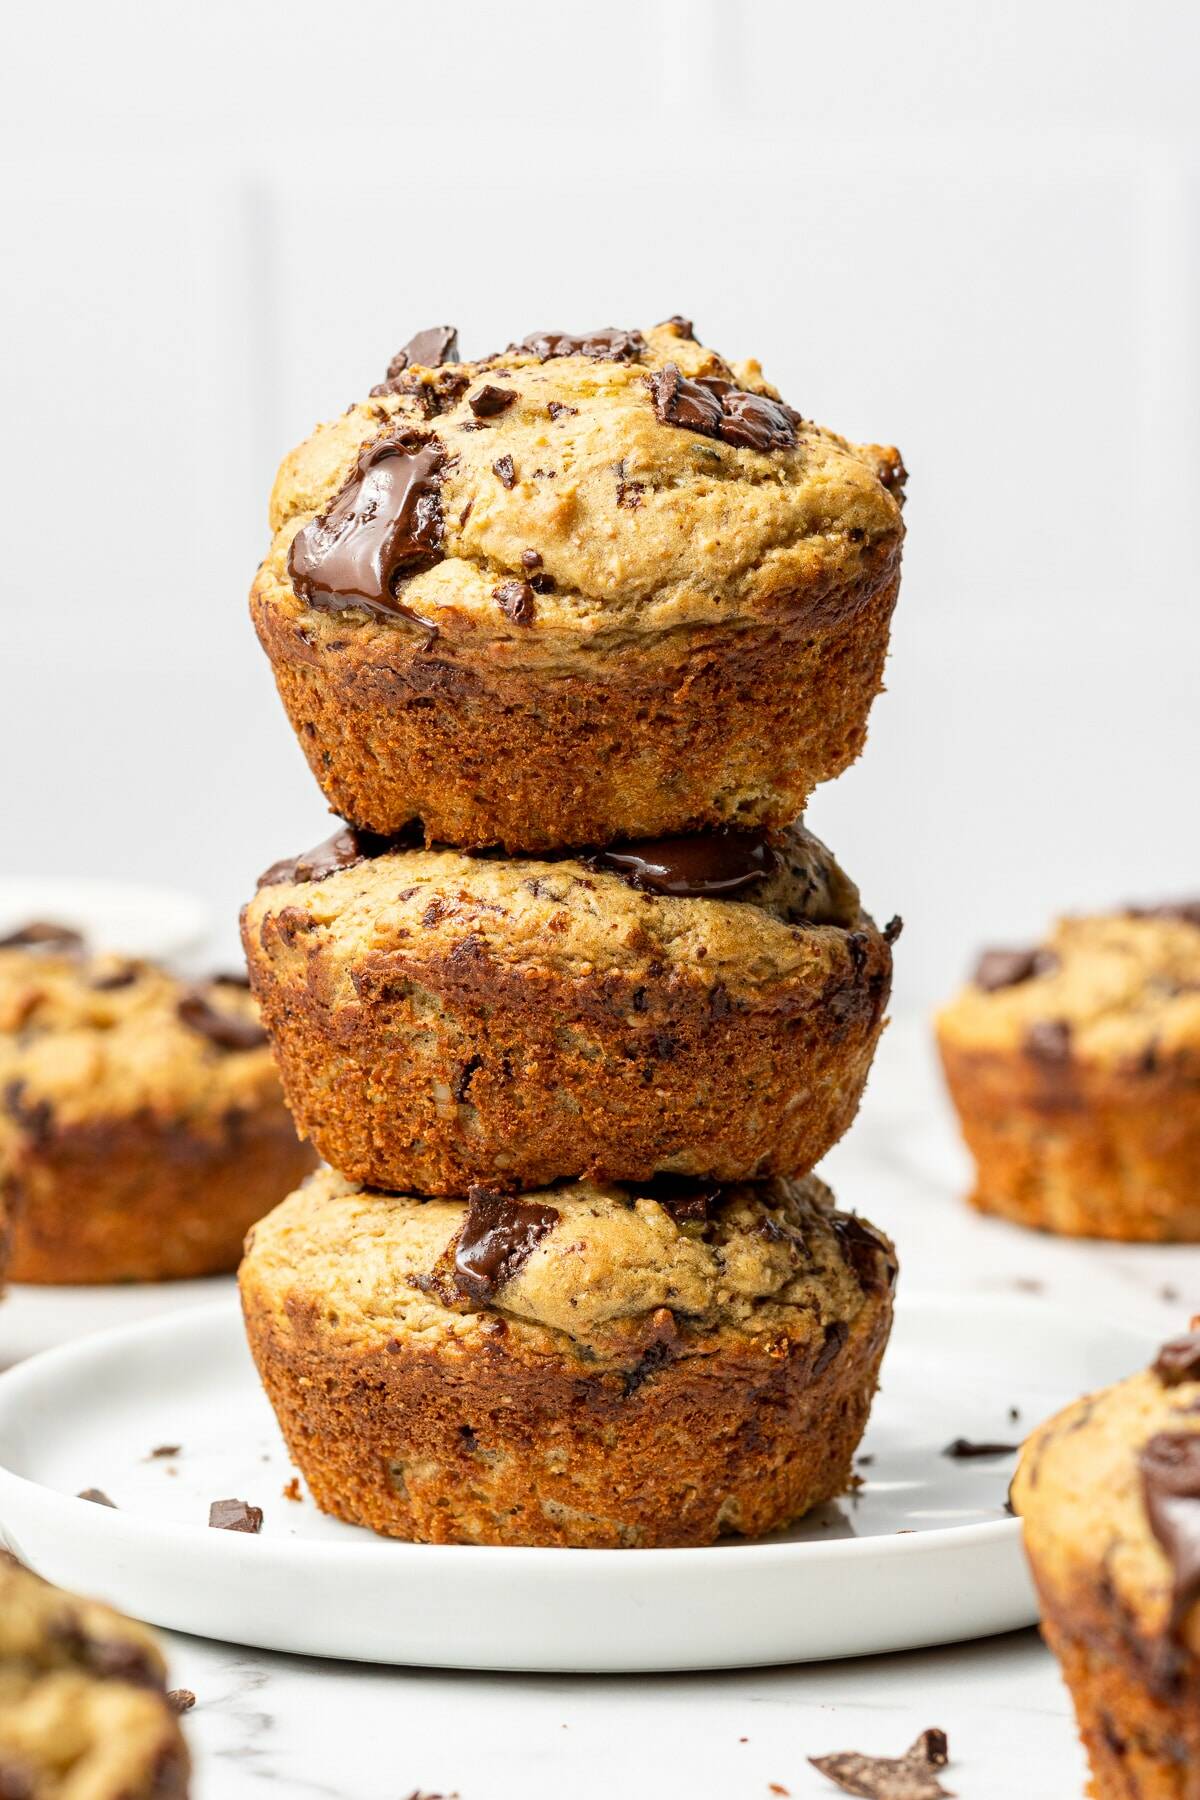 Stack of three chocolate banana muffins on a white plate.